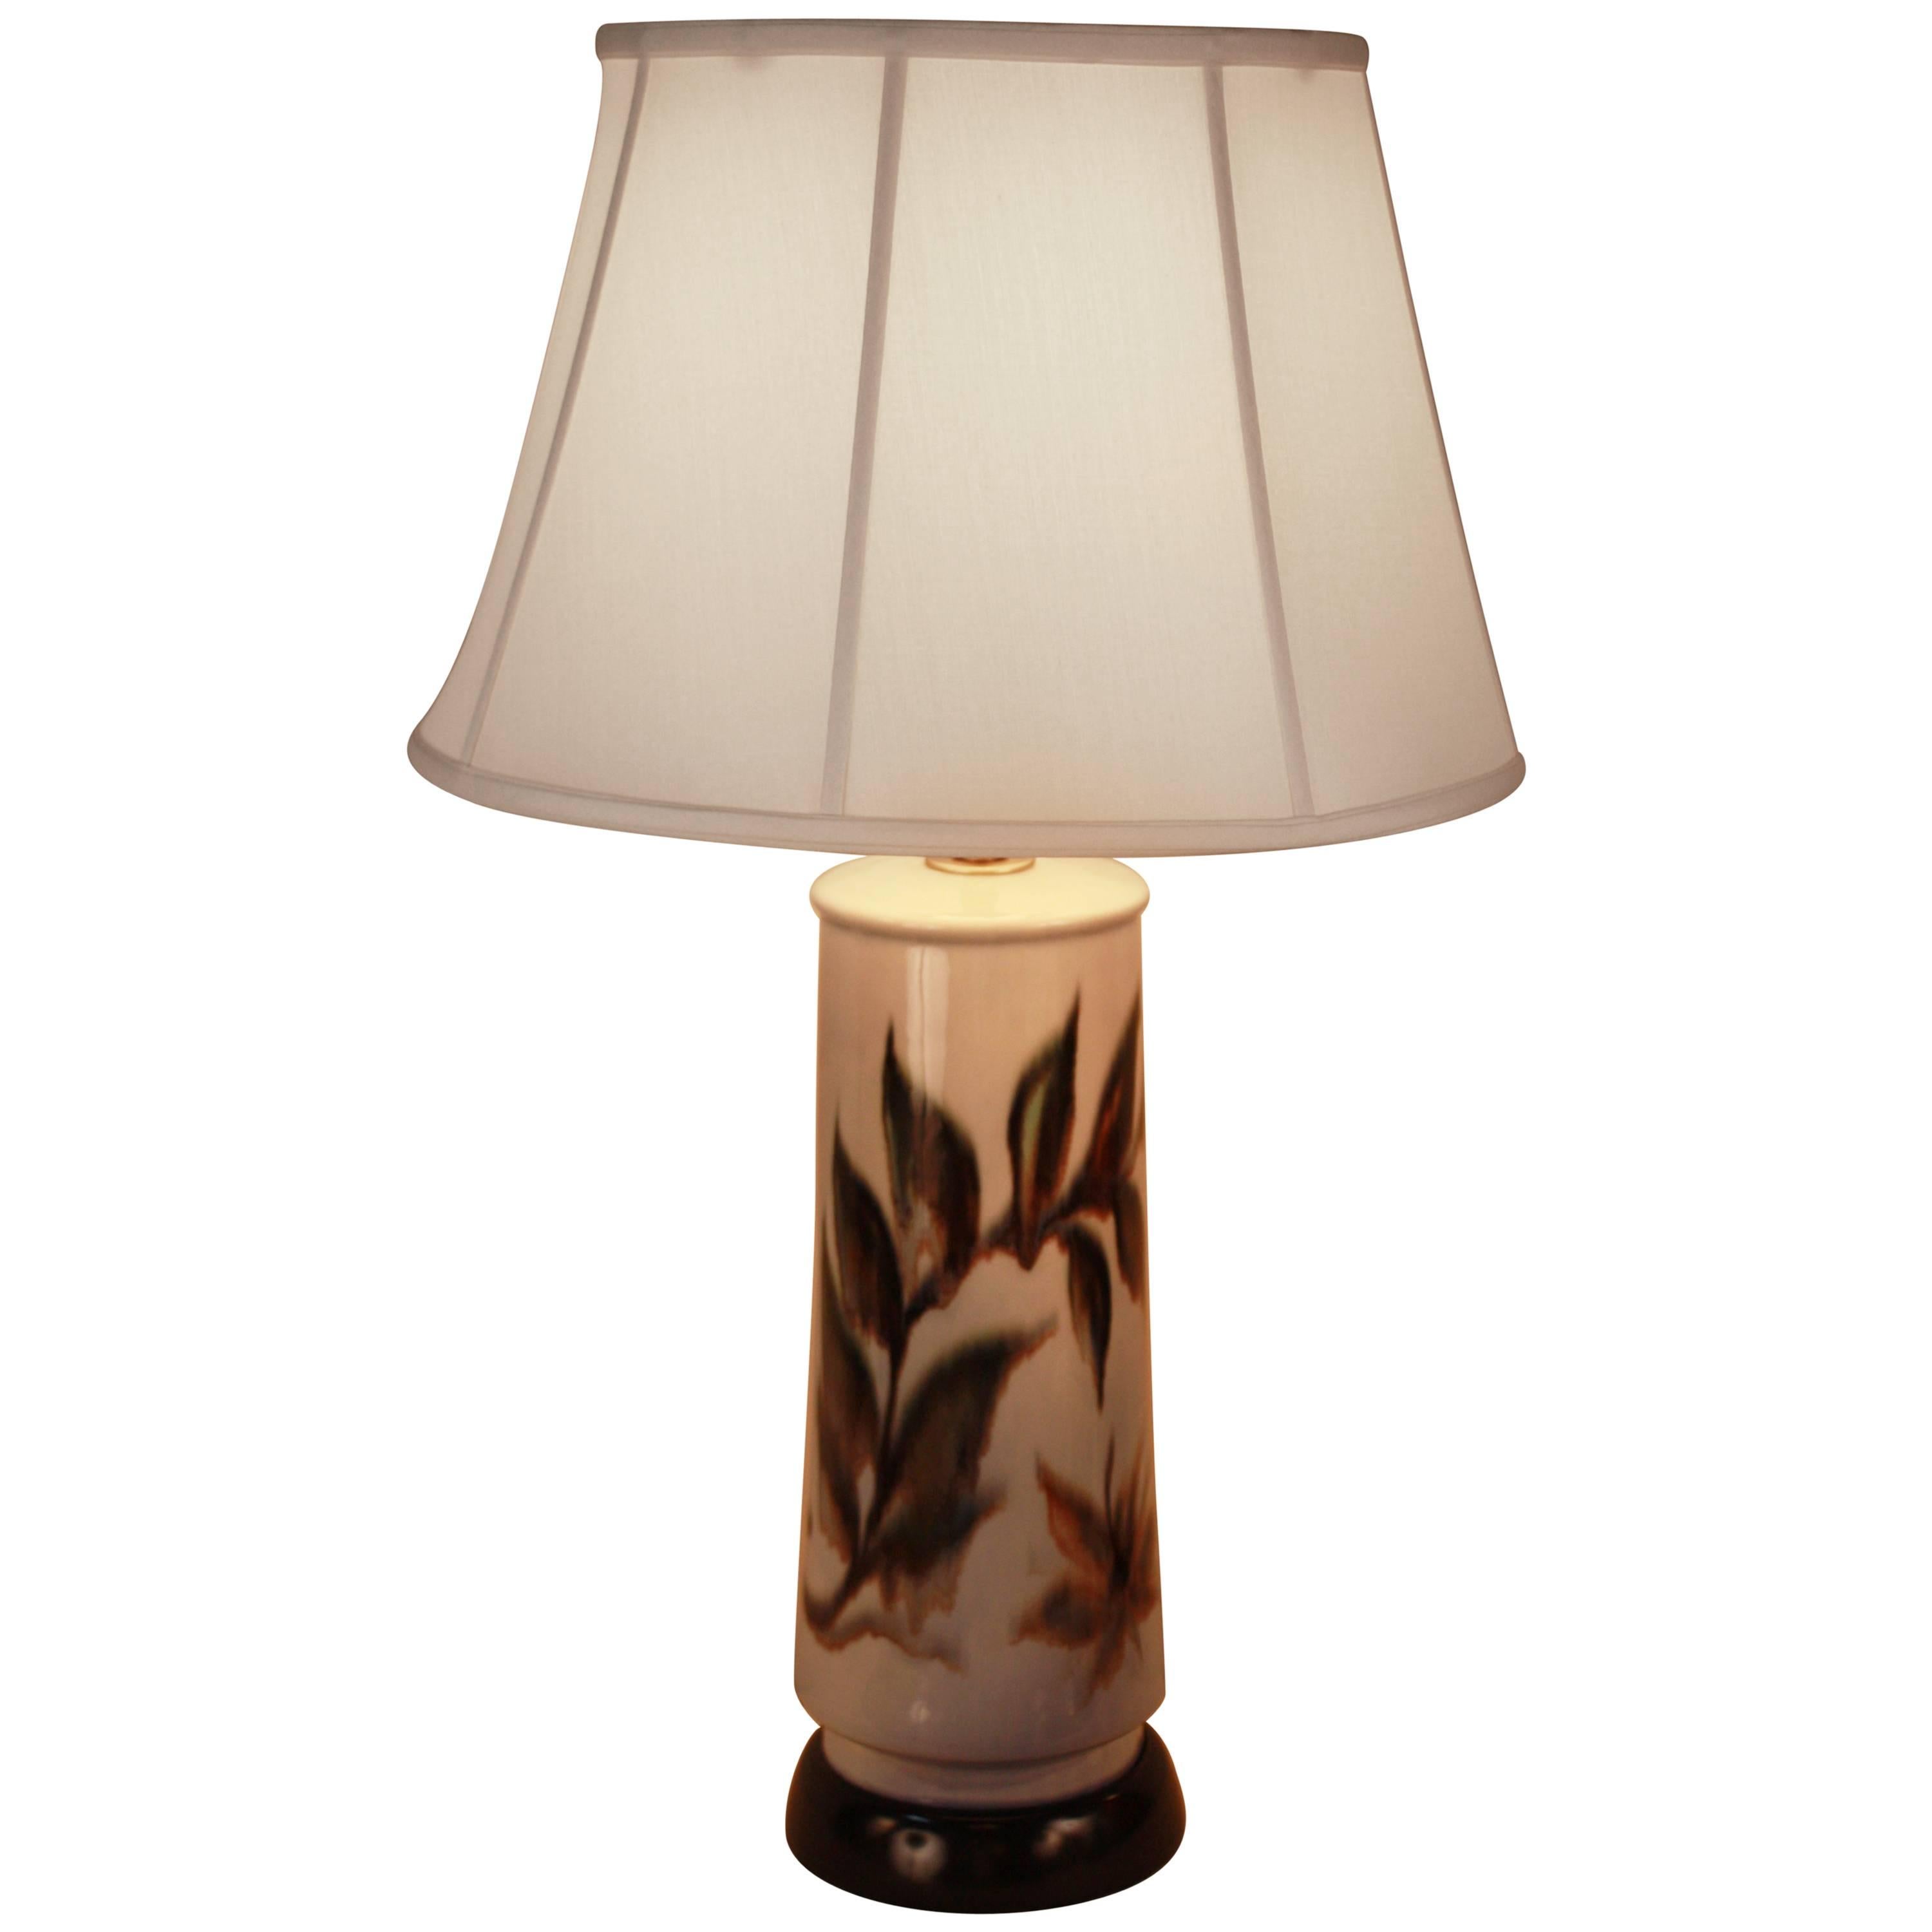 American Midcentury Pottery Table Lamp - 1